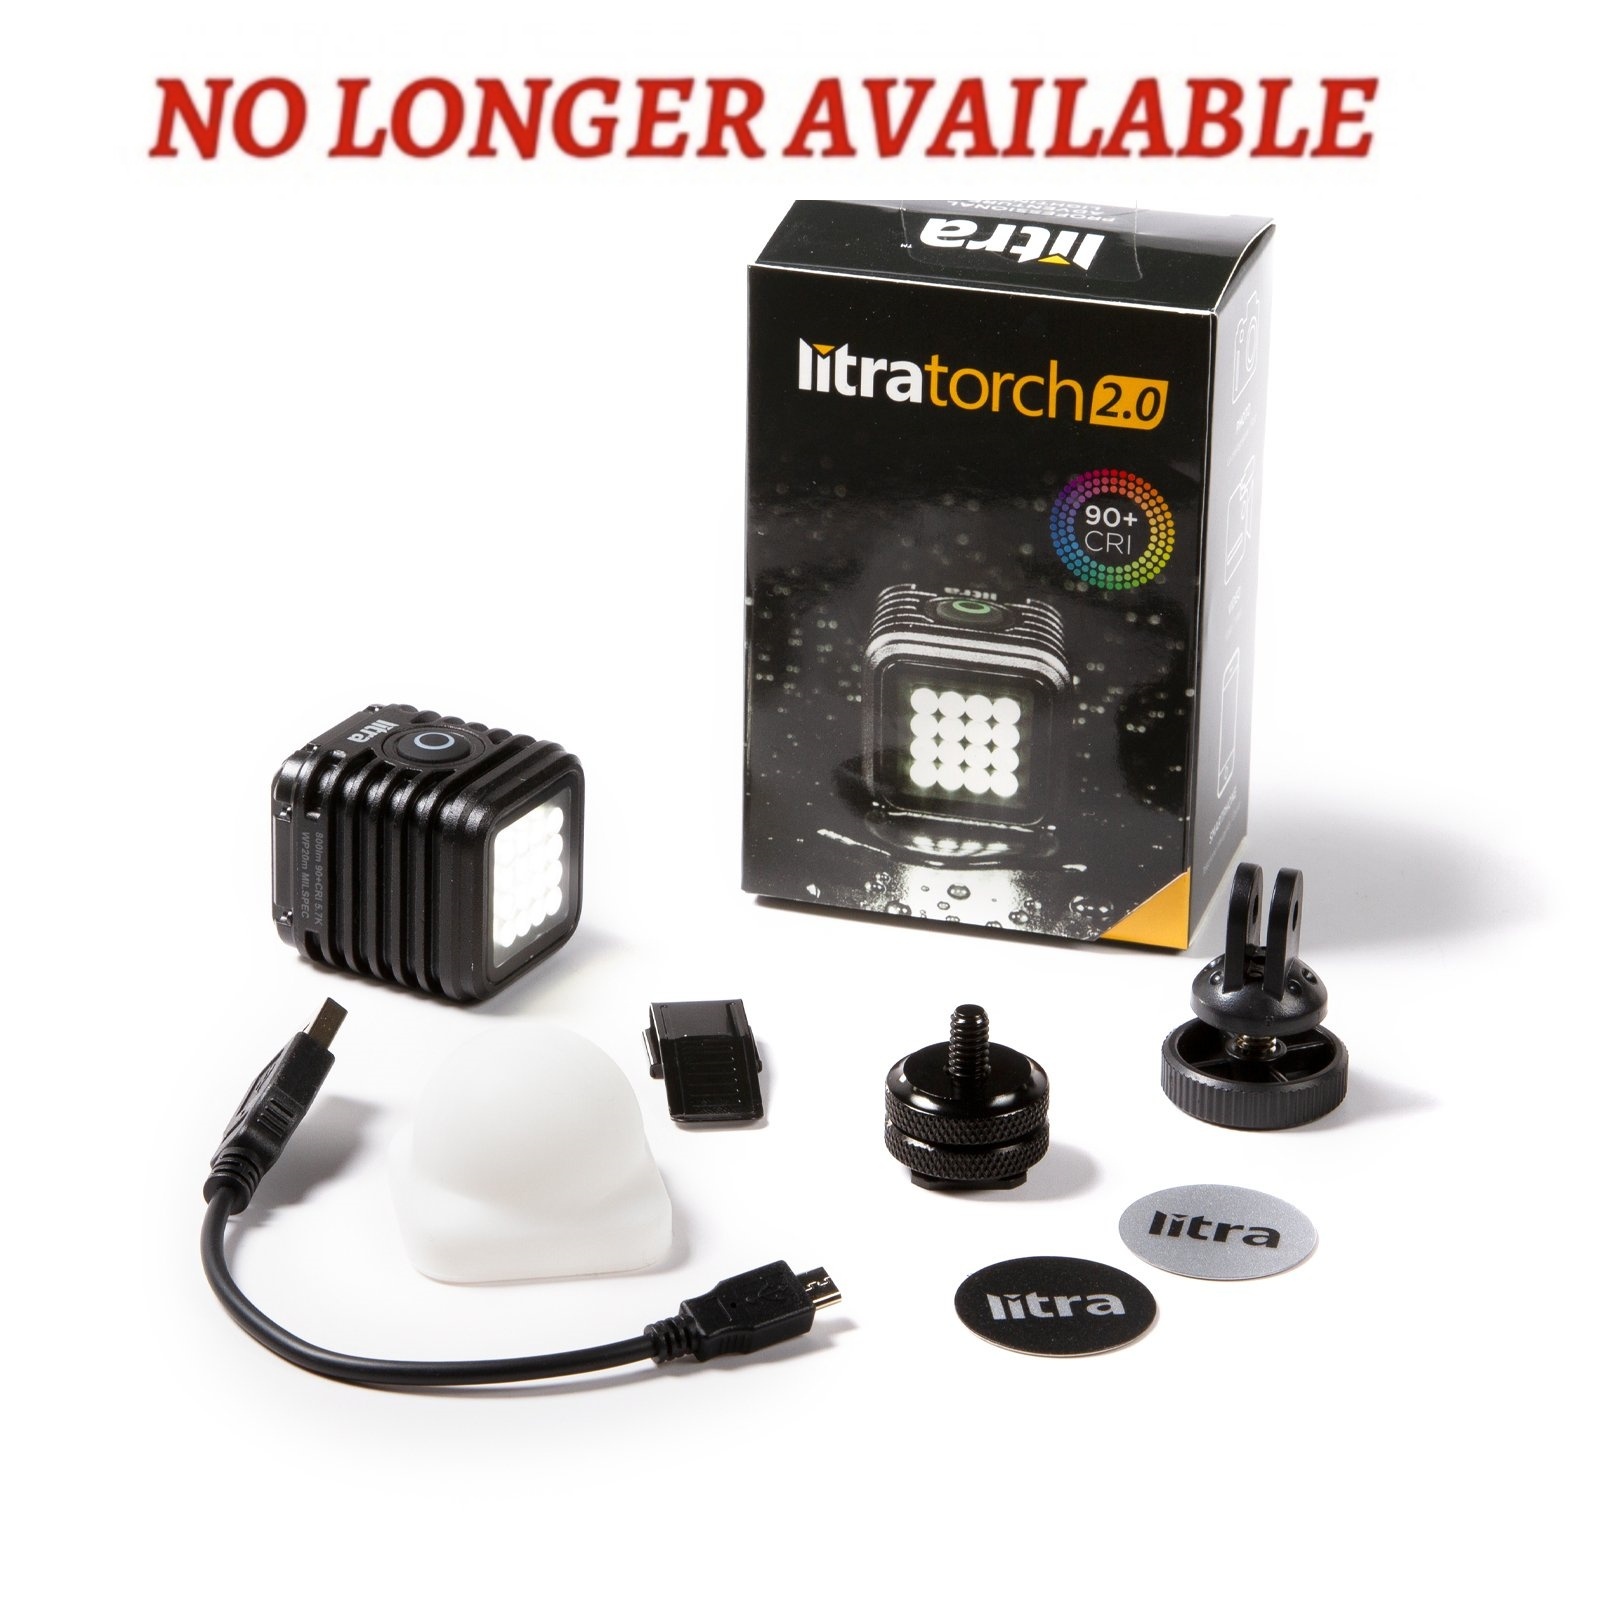 Torch 2.0 and 2.0 Drone Edition Litra Diffuser Set for Litra Torch 